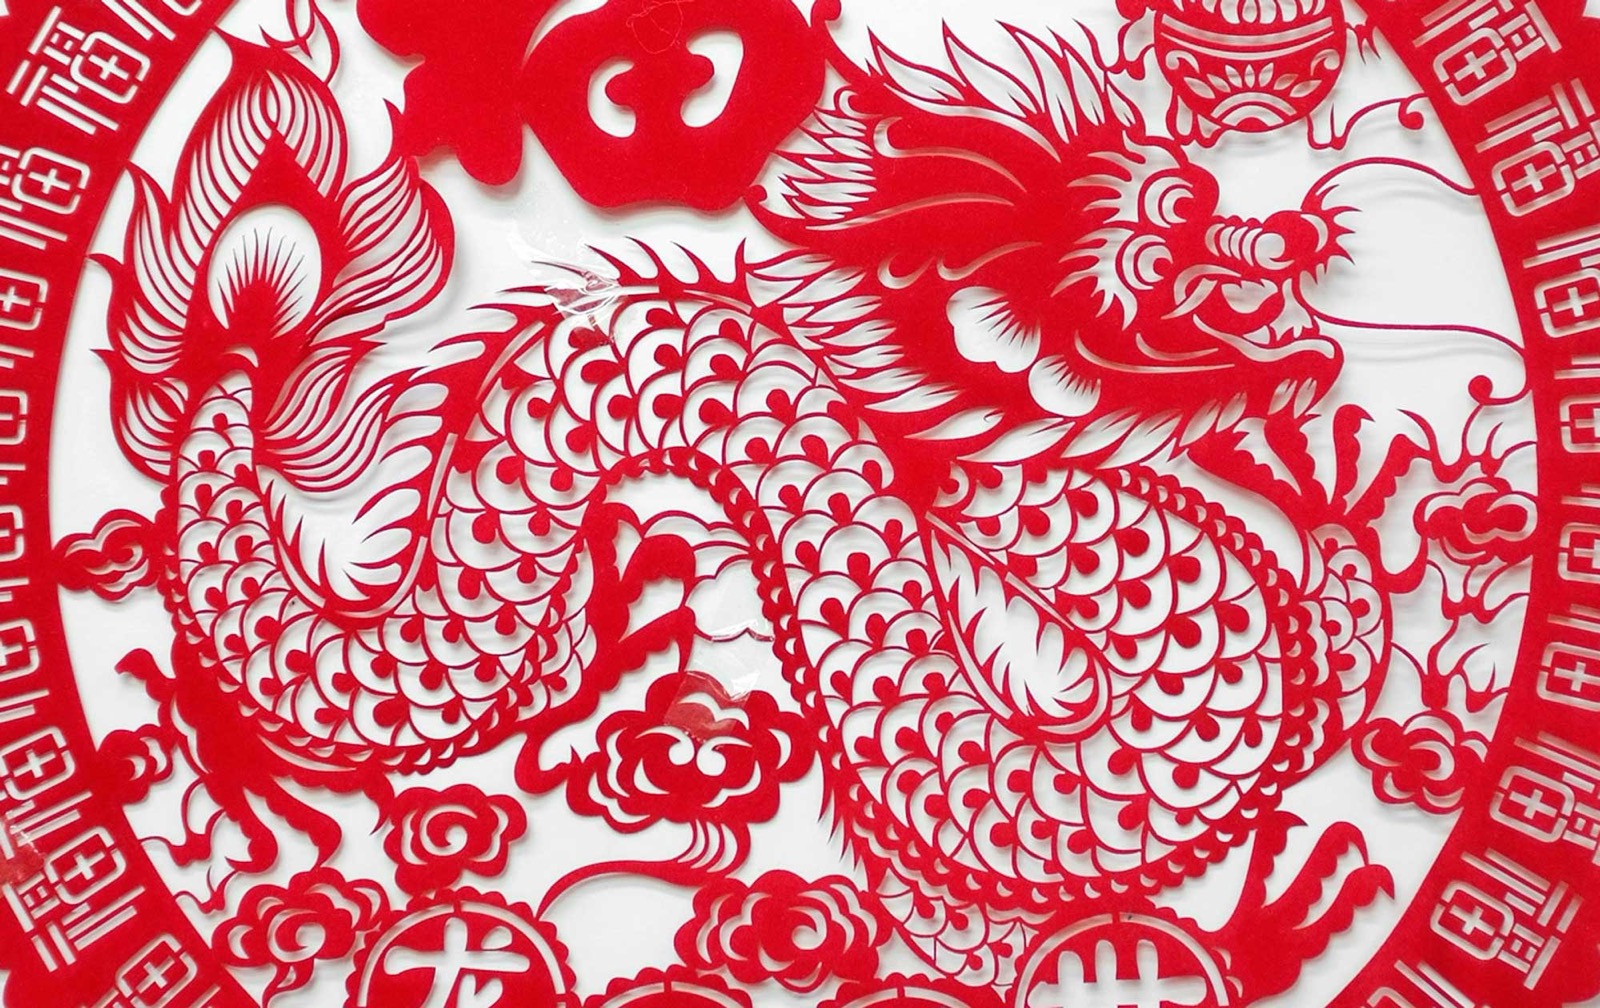 Chinese New Year Trivia Questions And Answers Chinese New Year dragon